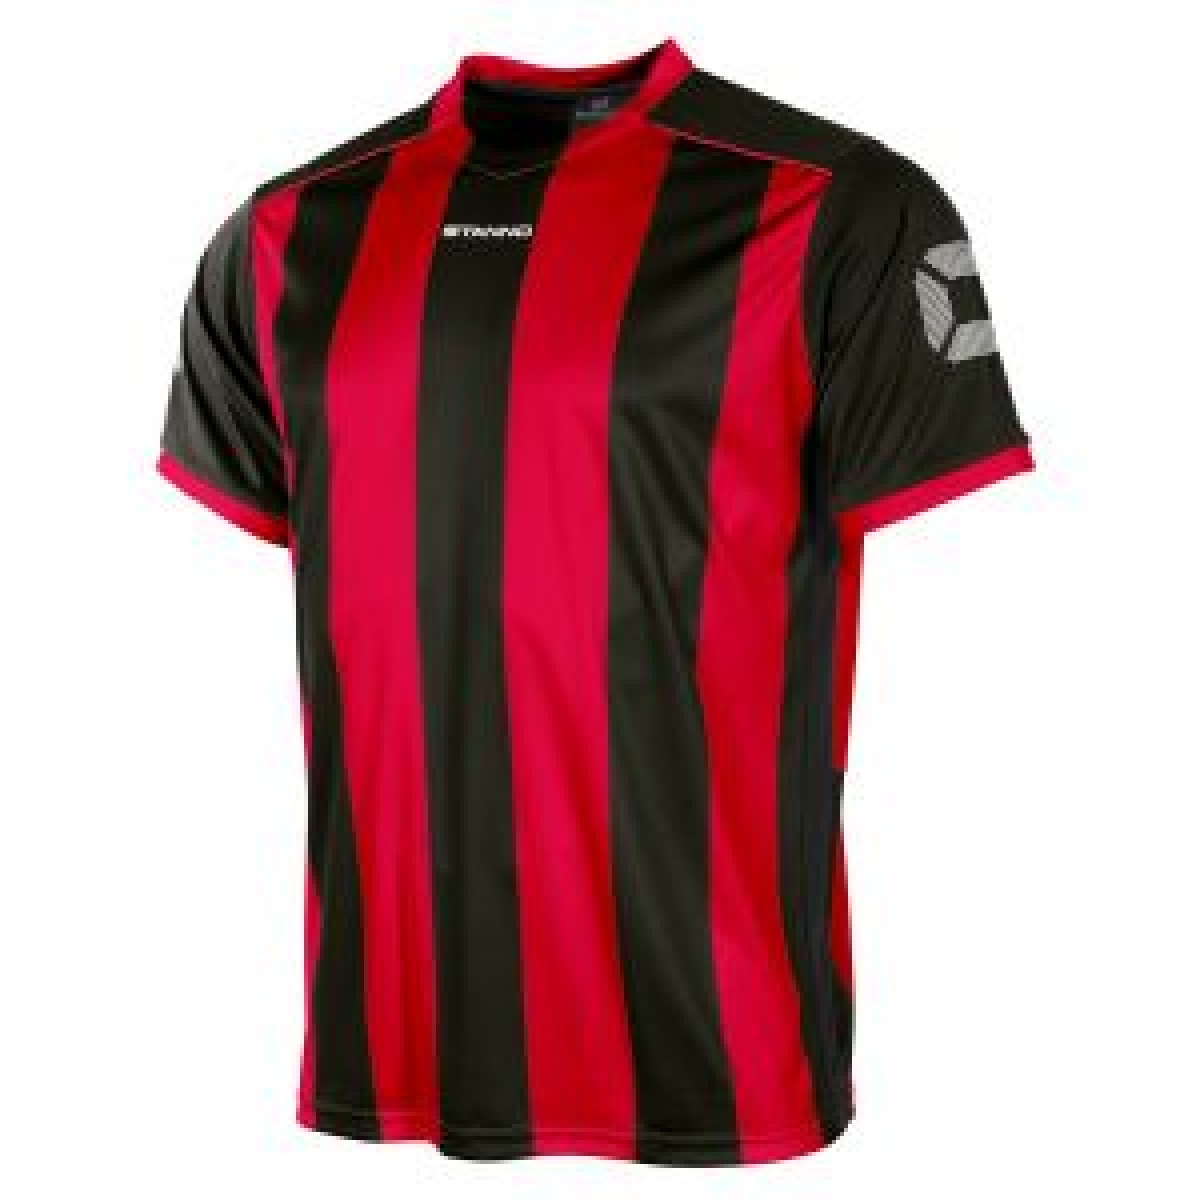 Linford Wanderers - Stanno Brighton Jersey S/S, Linford Wanderers FC, Custom Image Product